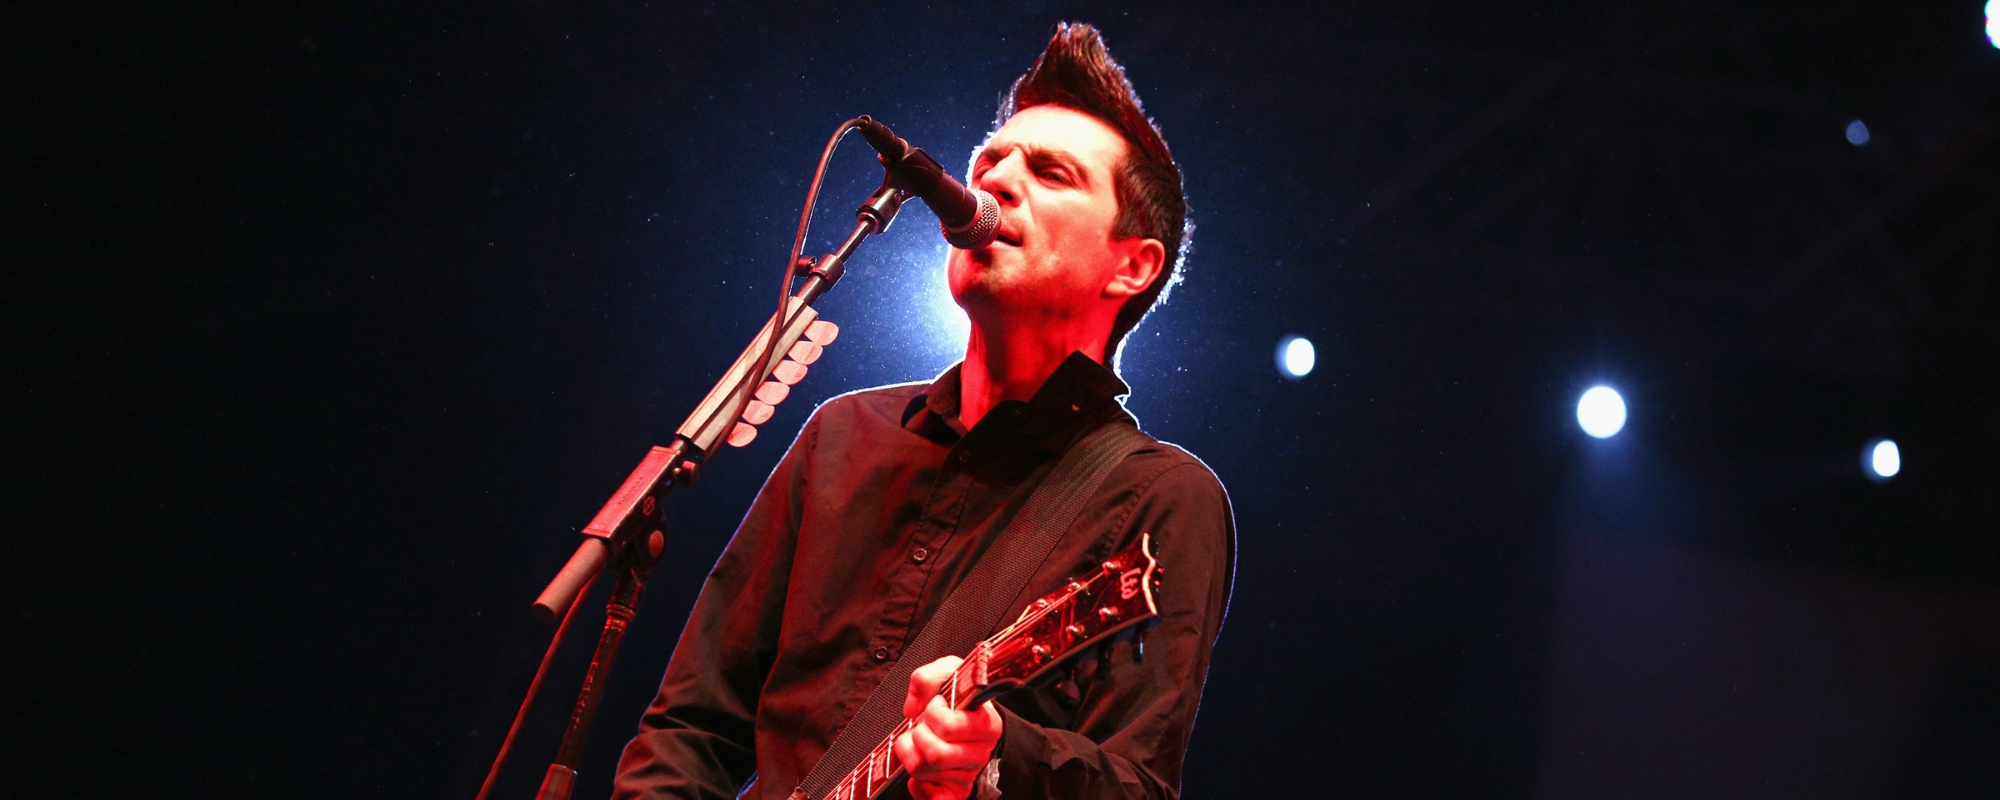 Anti-Flag Frontman Justin Sane Sued, Accused of Strangling and Raping Fan